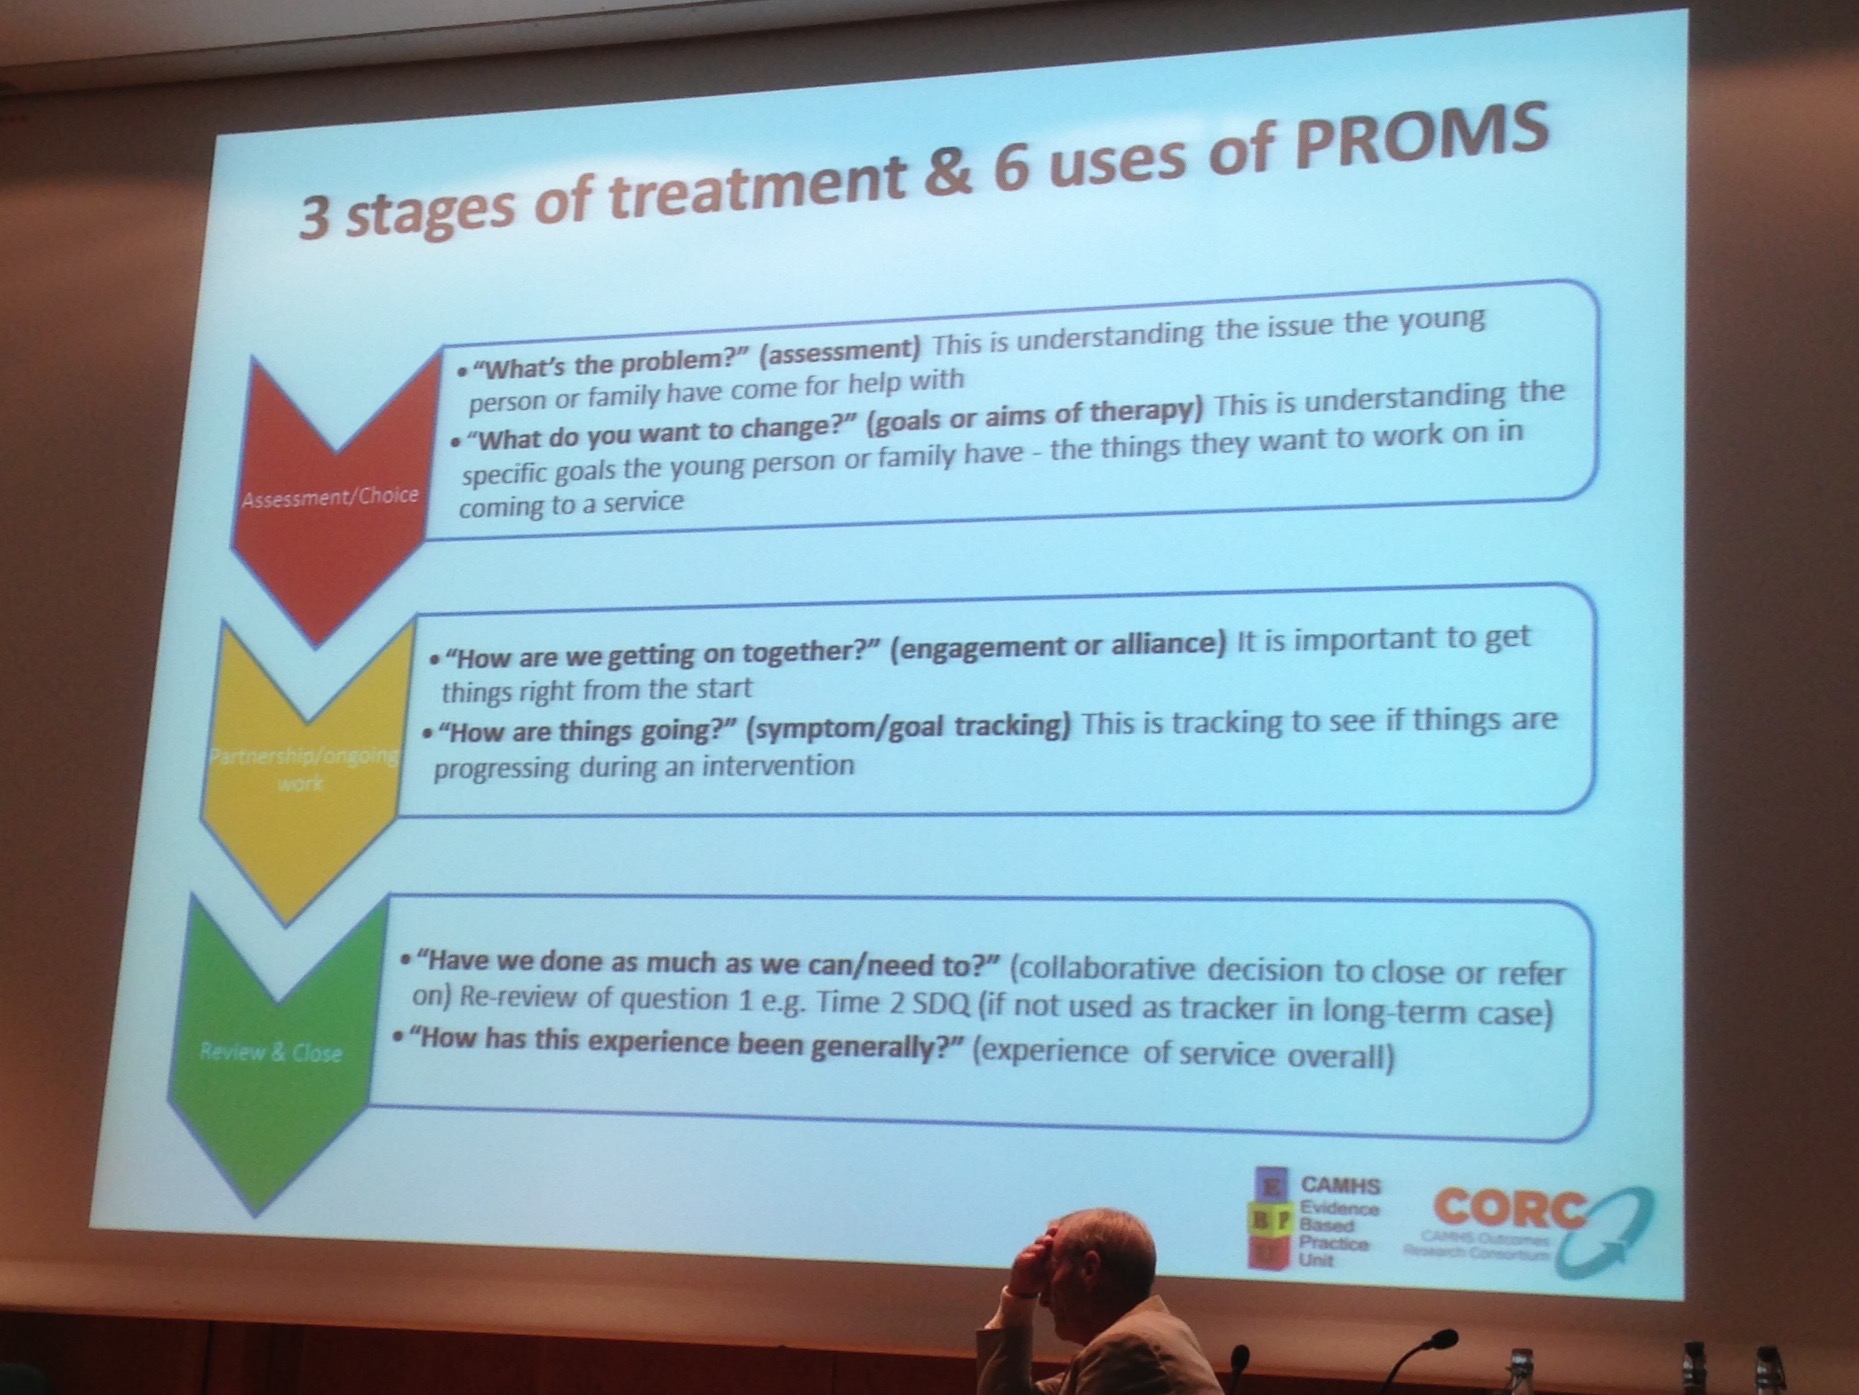 3 stages of treatment and 6 uses of PROMS